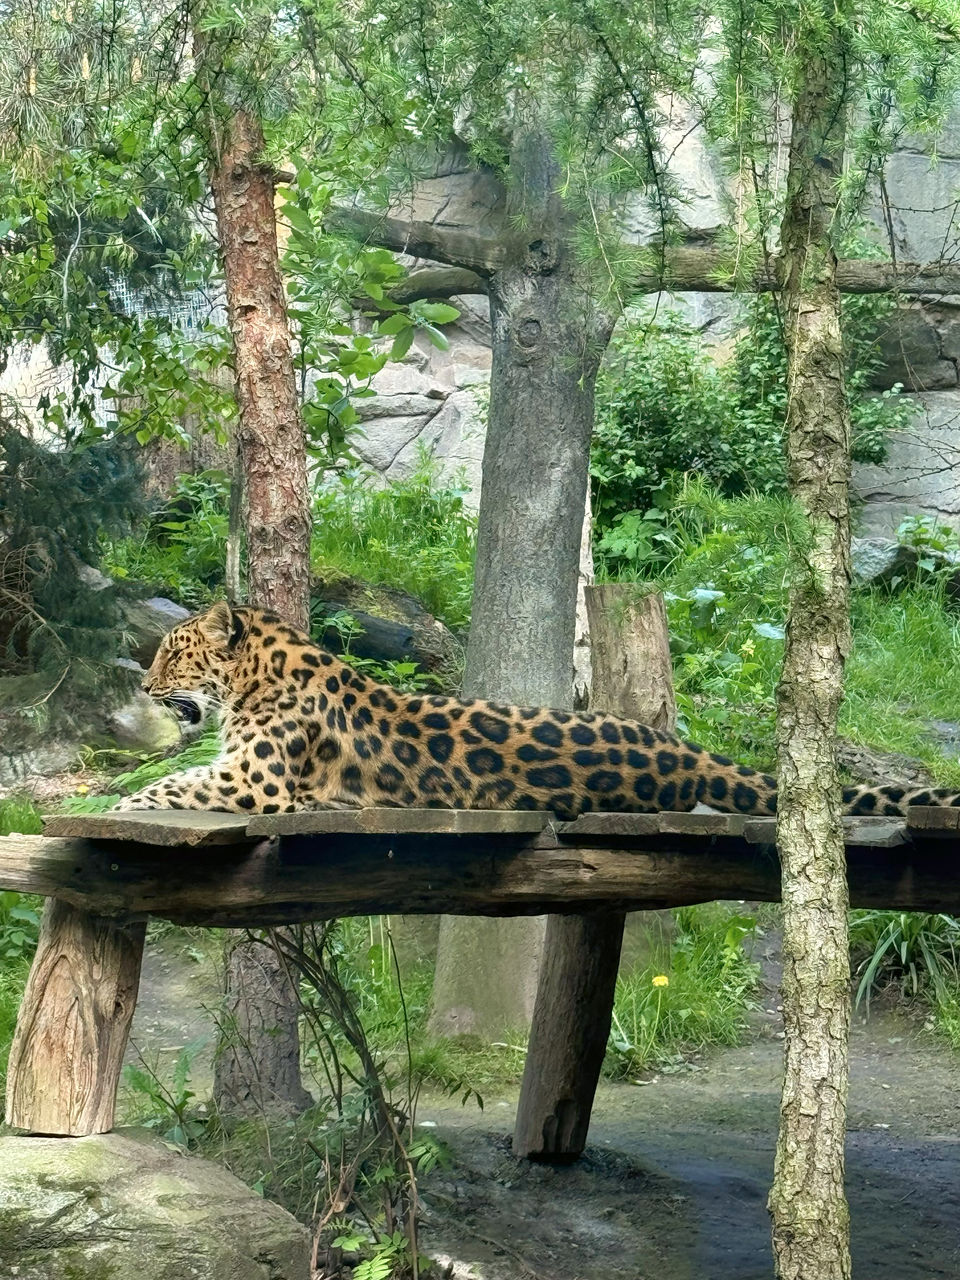 animal, animal themes, tree, animal wildlife, big cat, feline, mammal, wildlife, plant, cat, one animal, jungle, leopard, nature, relaxation, carnivora, no people, zoo, safari, tree trunk, trunk, day, felidae, forest, outdoors, pet, beauty in nature, branch, resting, domestic animals, land, animal markings, spotted, wood